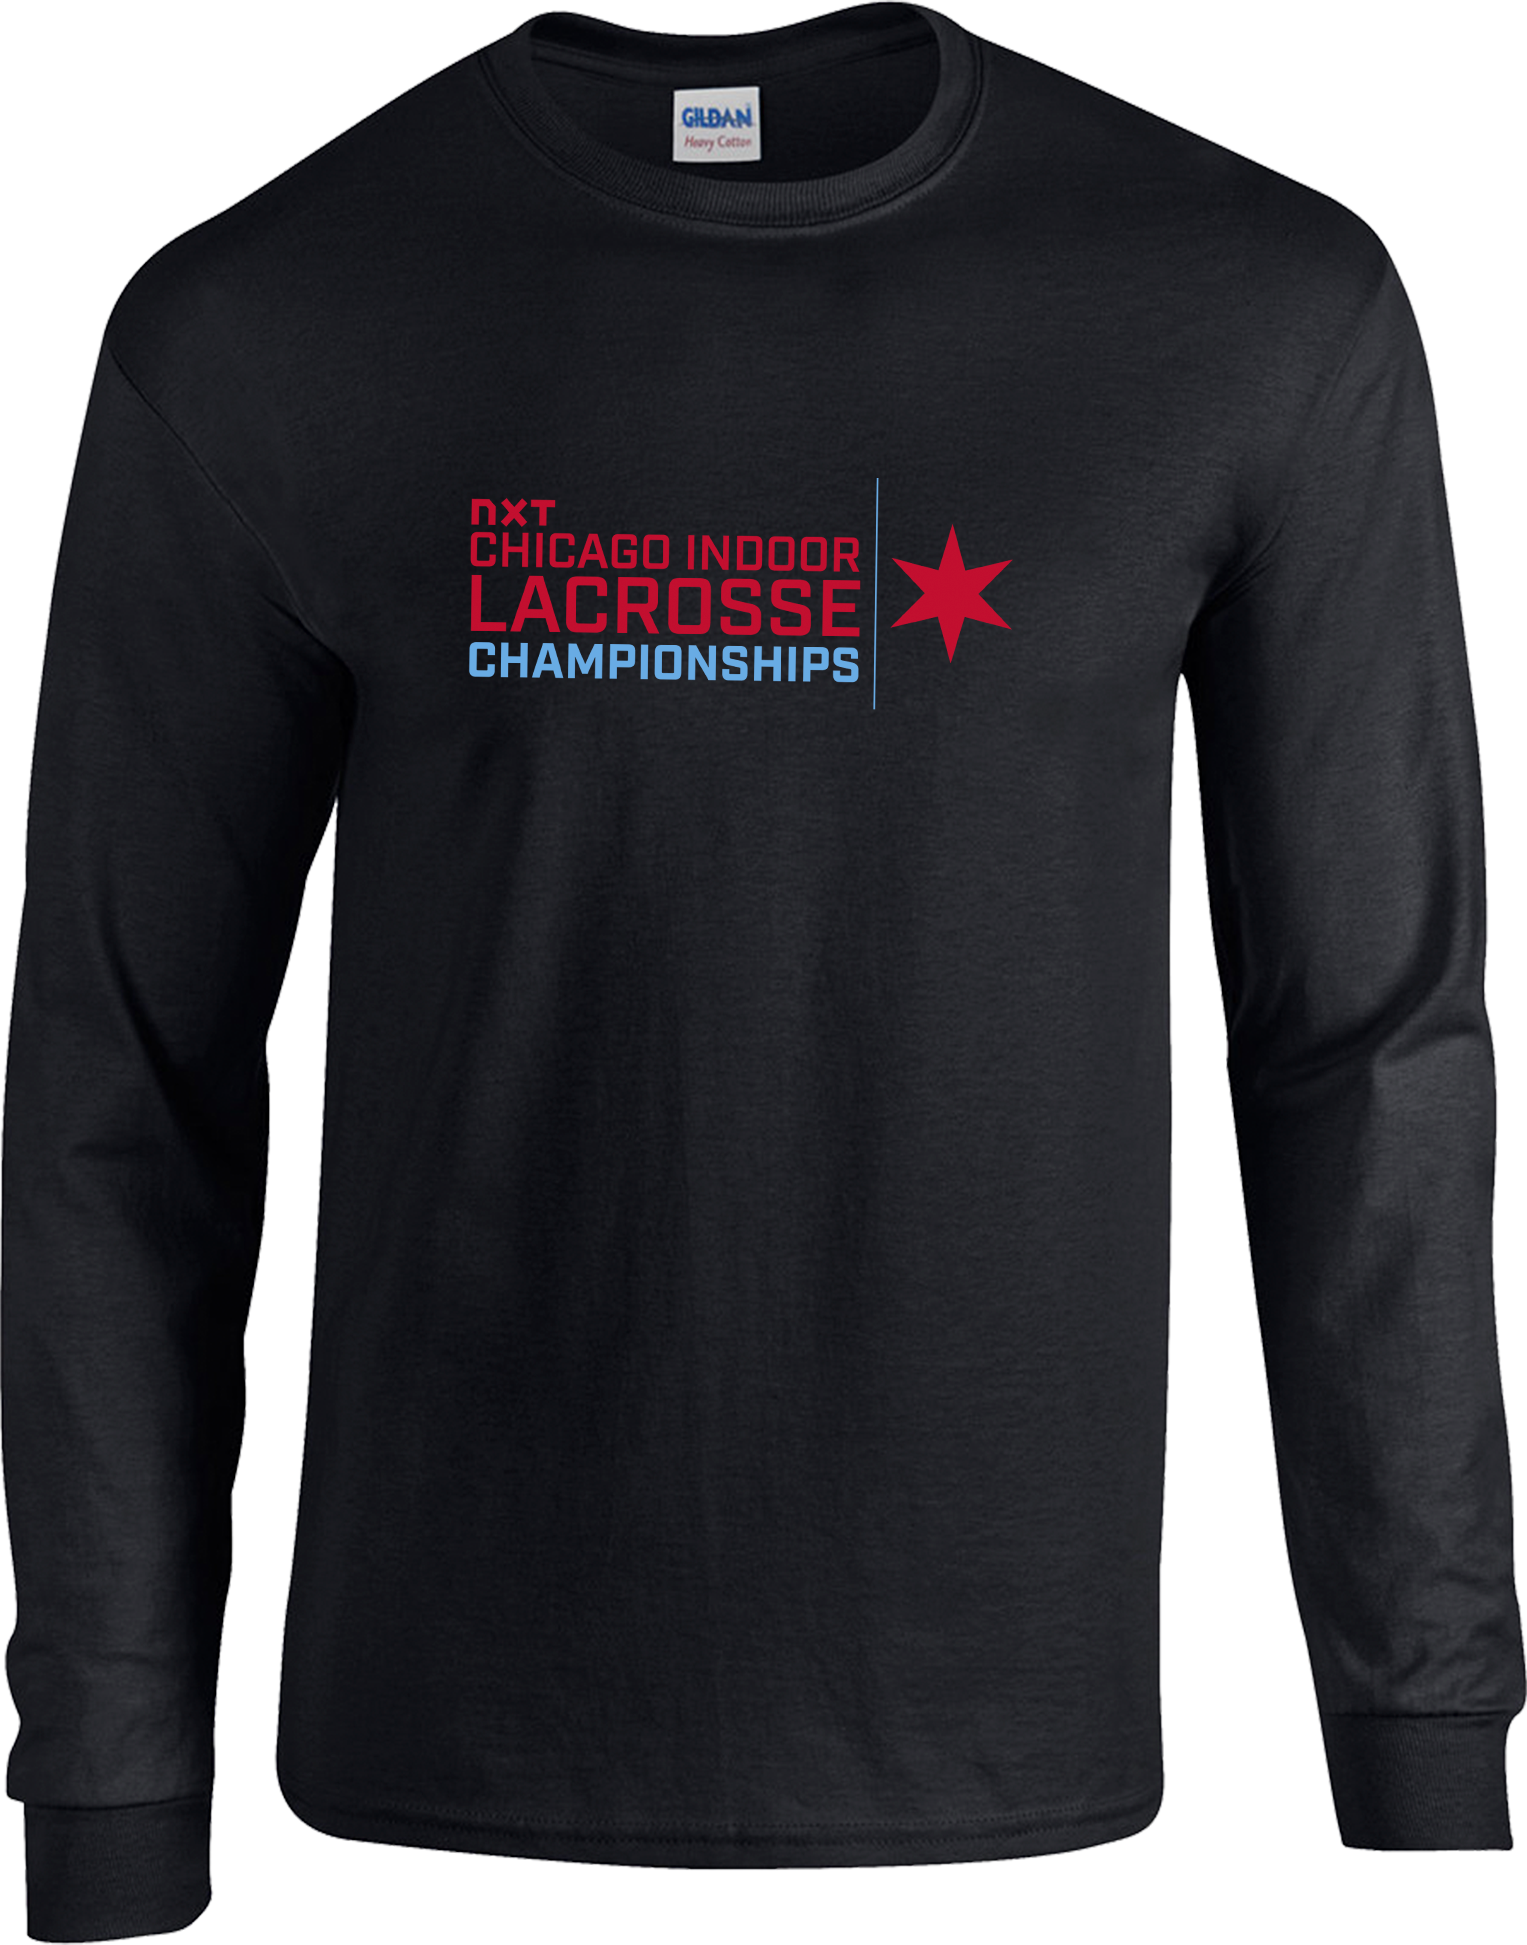 LONG SLEEVES - 2023 Chicago Indoor Lacrosse Championships